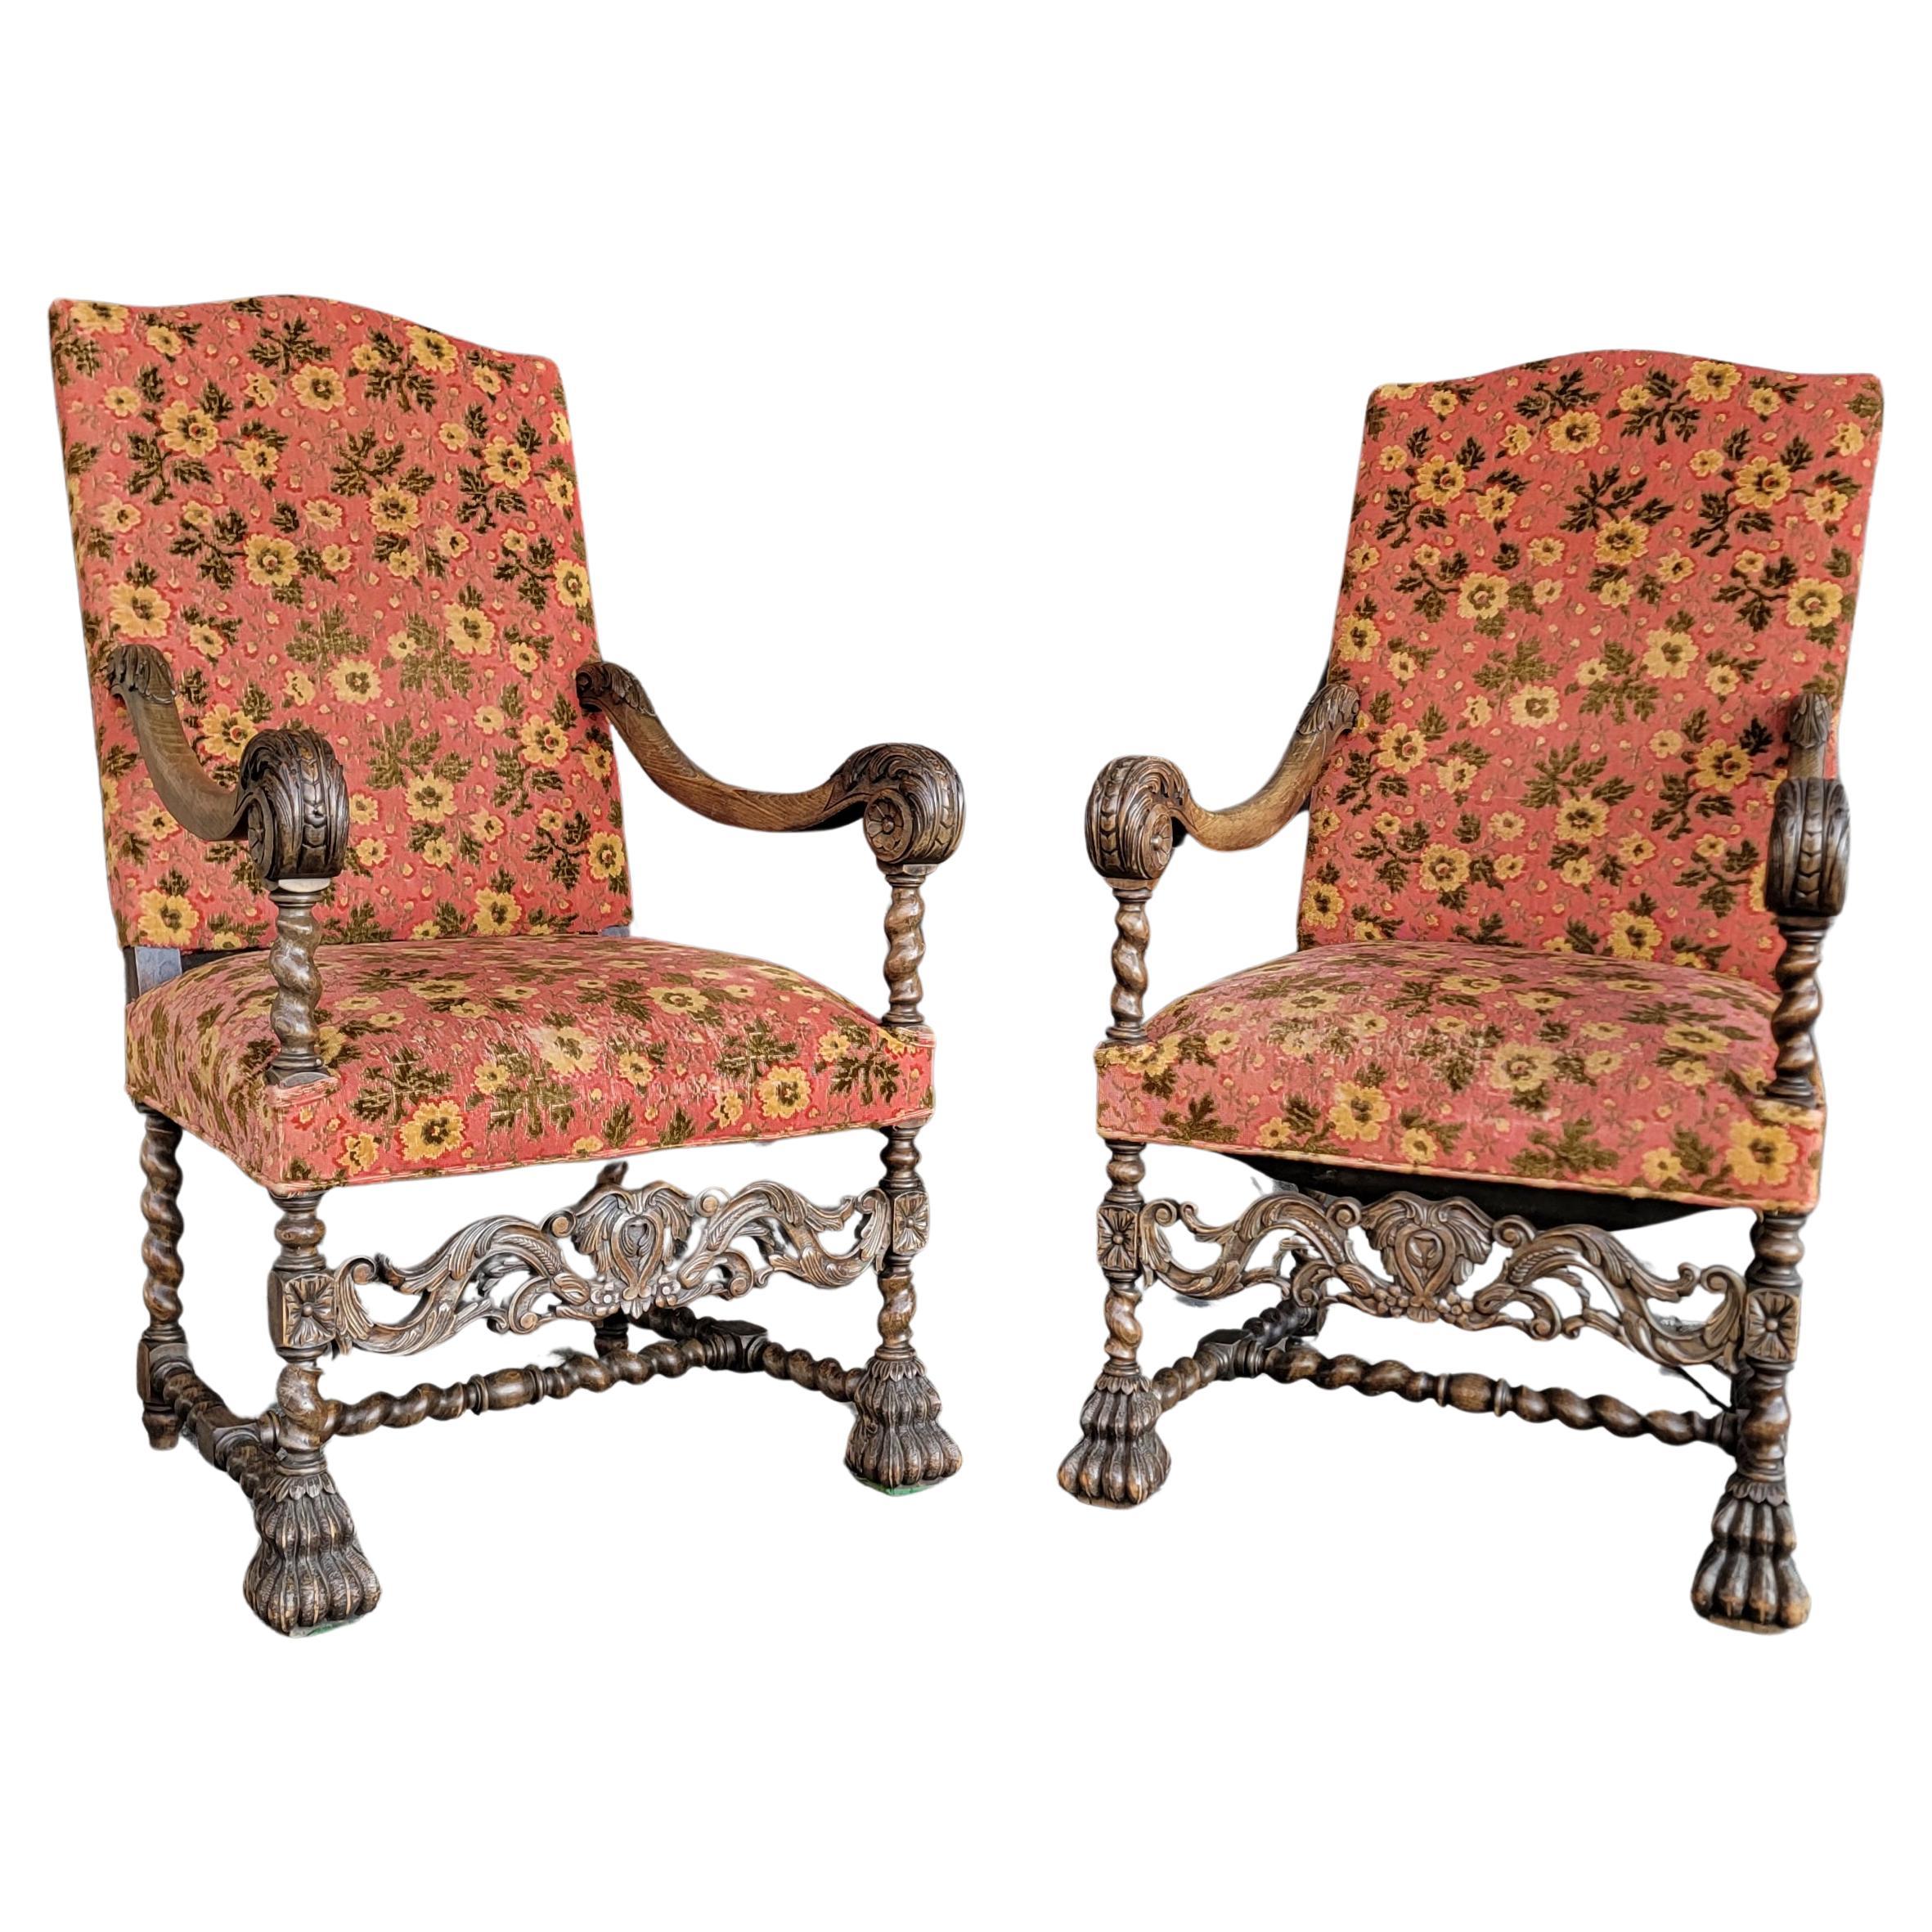 Gothic Revival Throne Chairs a Pair For Sale